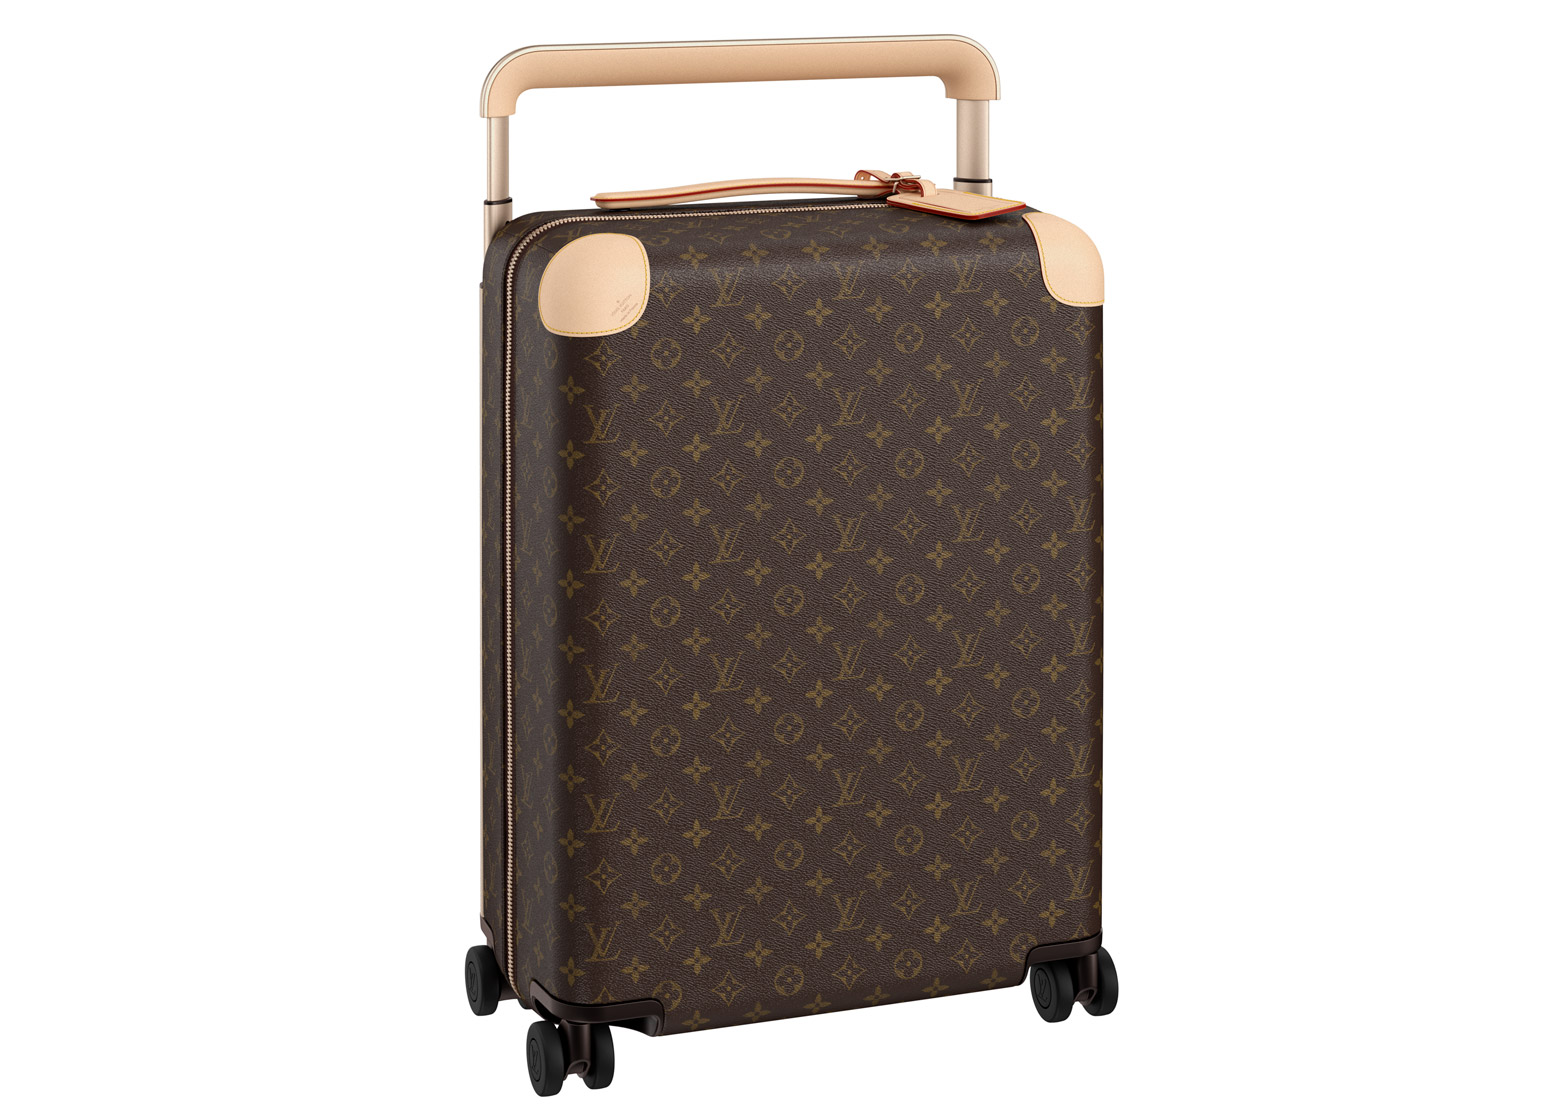 LVMH Updates Louis Vuitton Luggage & Packaging